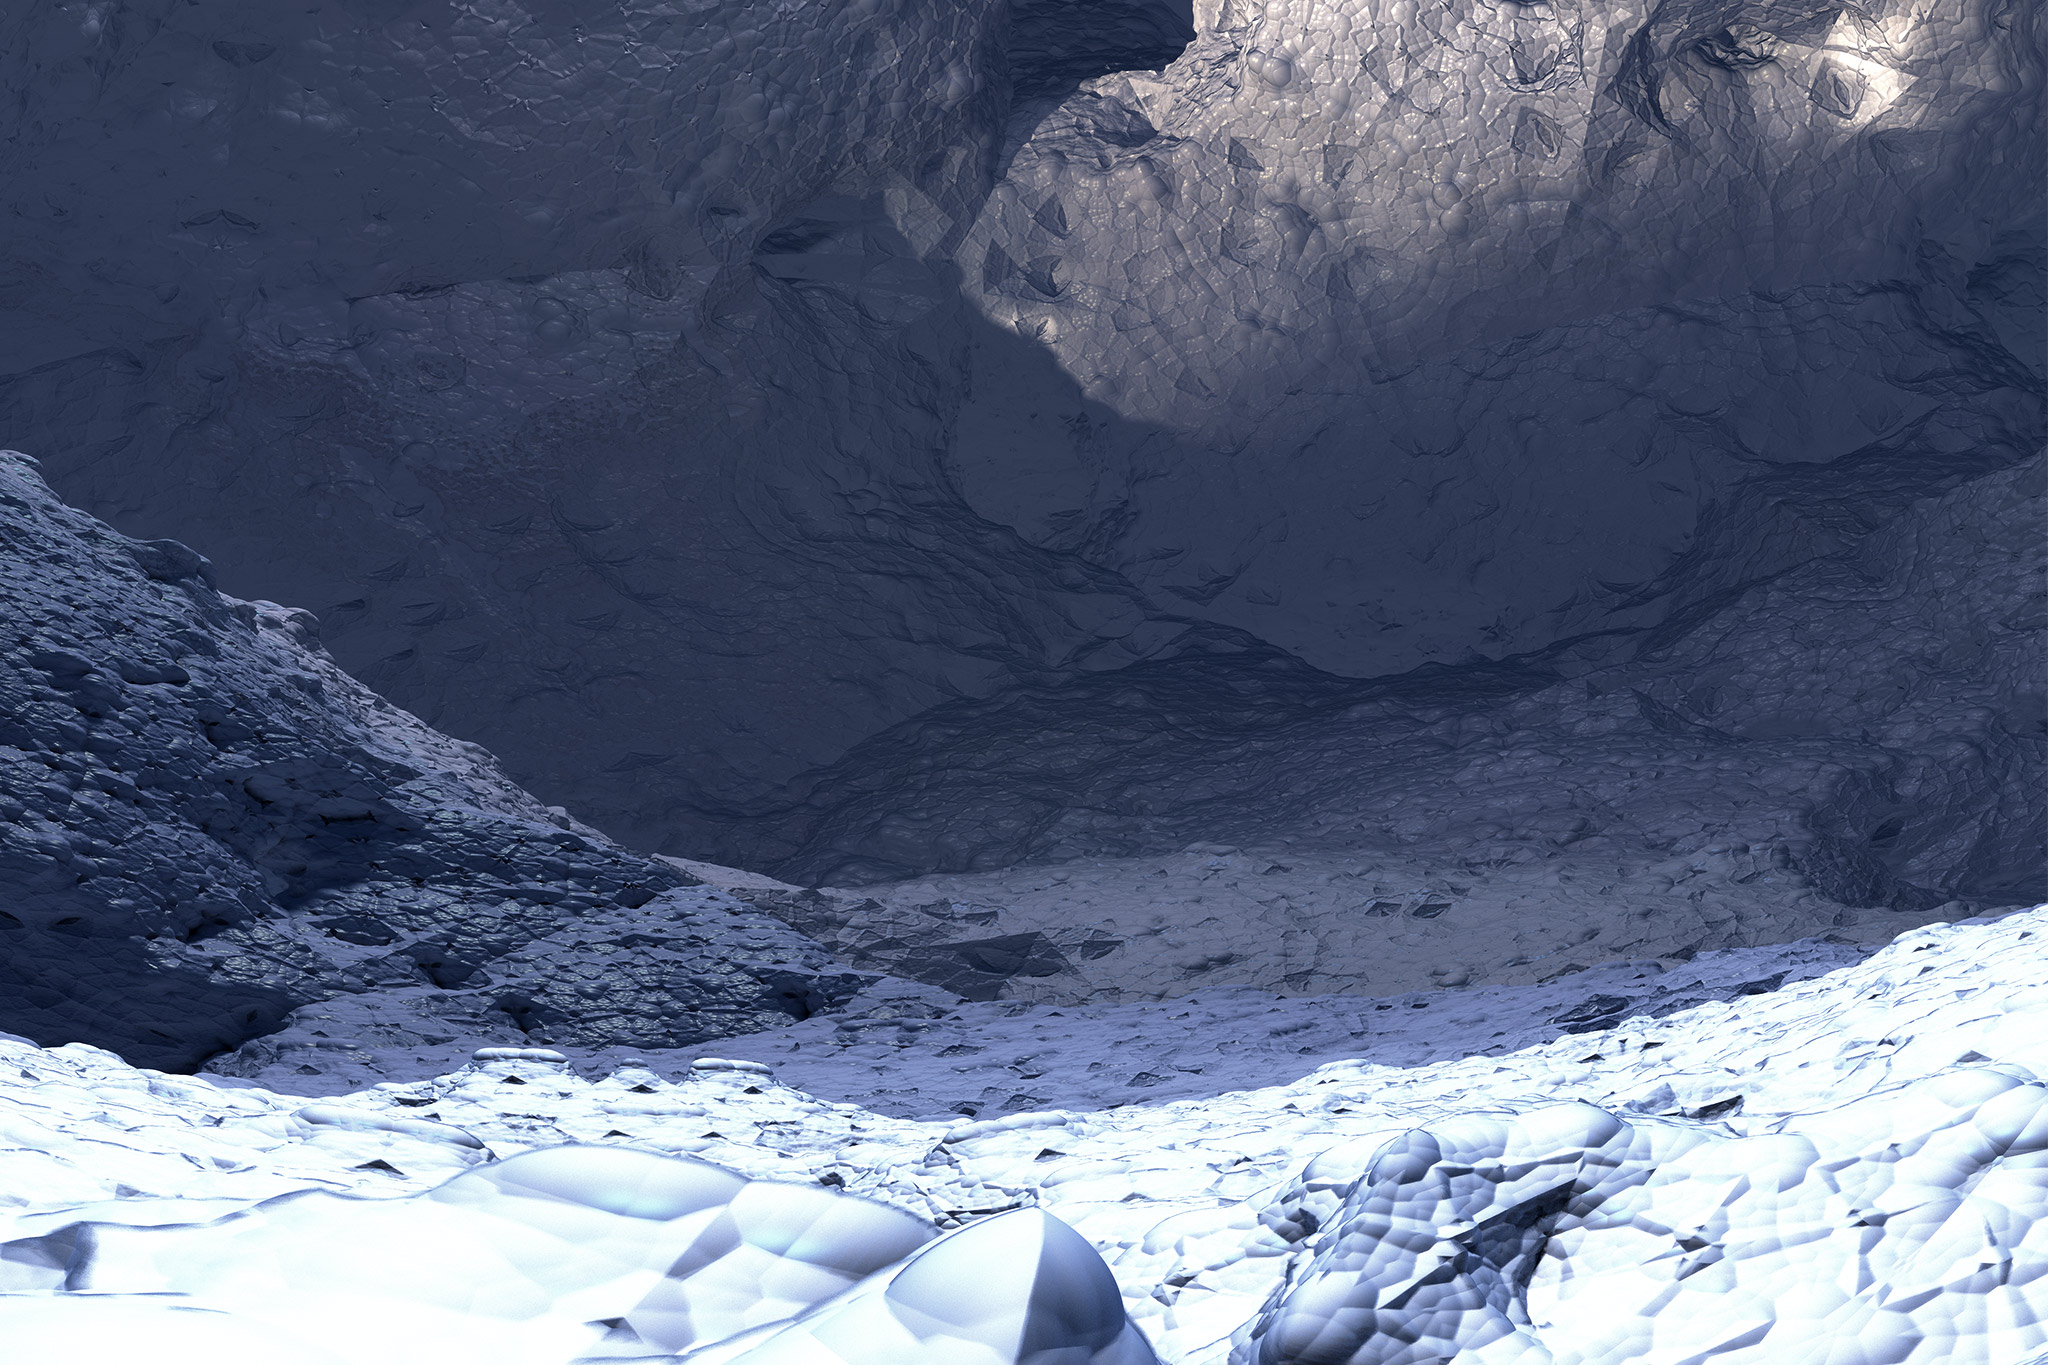 A cave with snow in the foreground composed of sphereical geometry